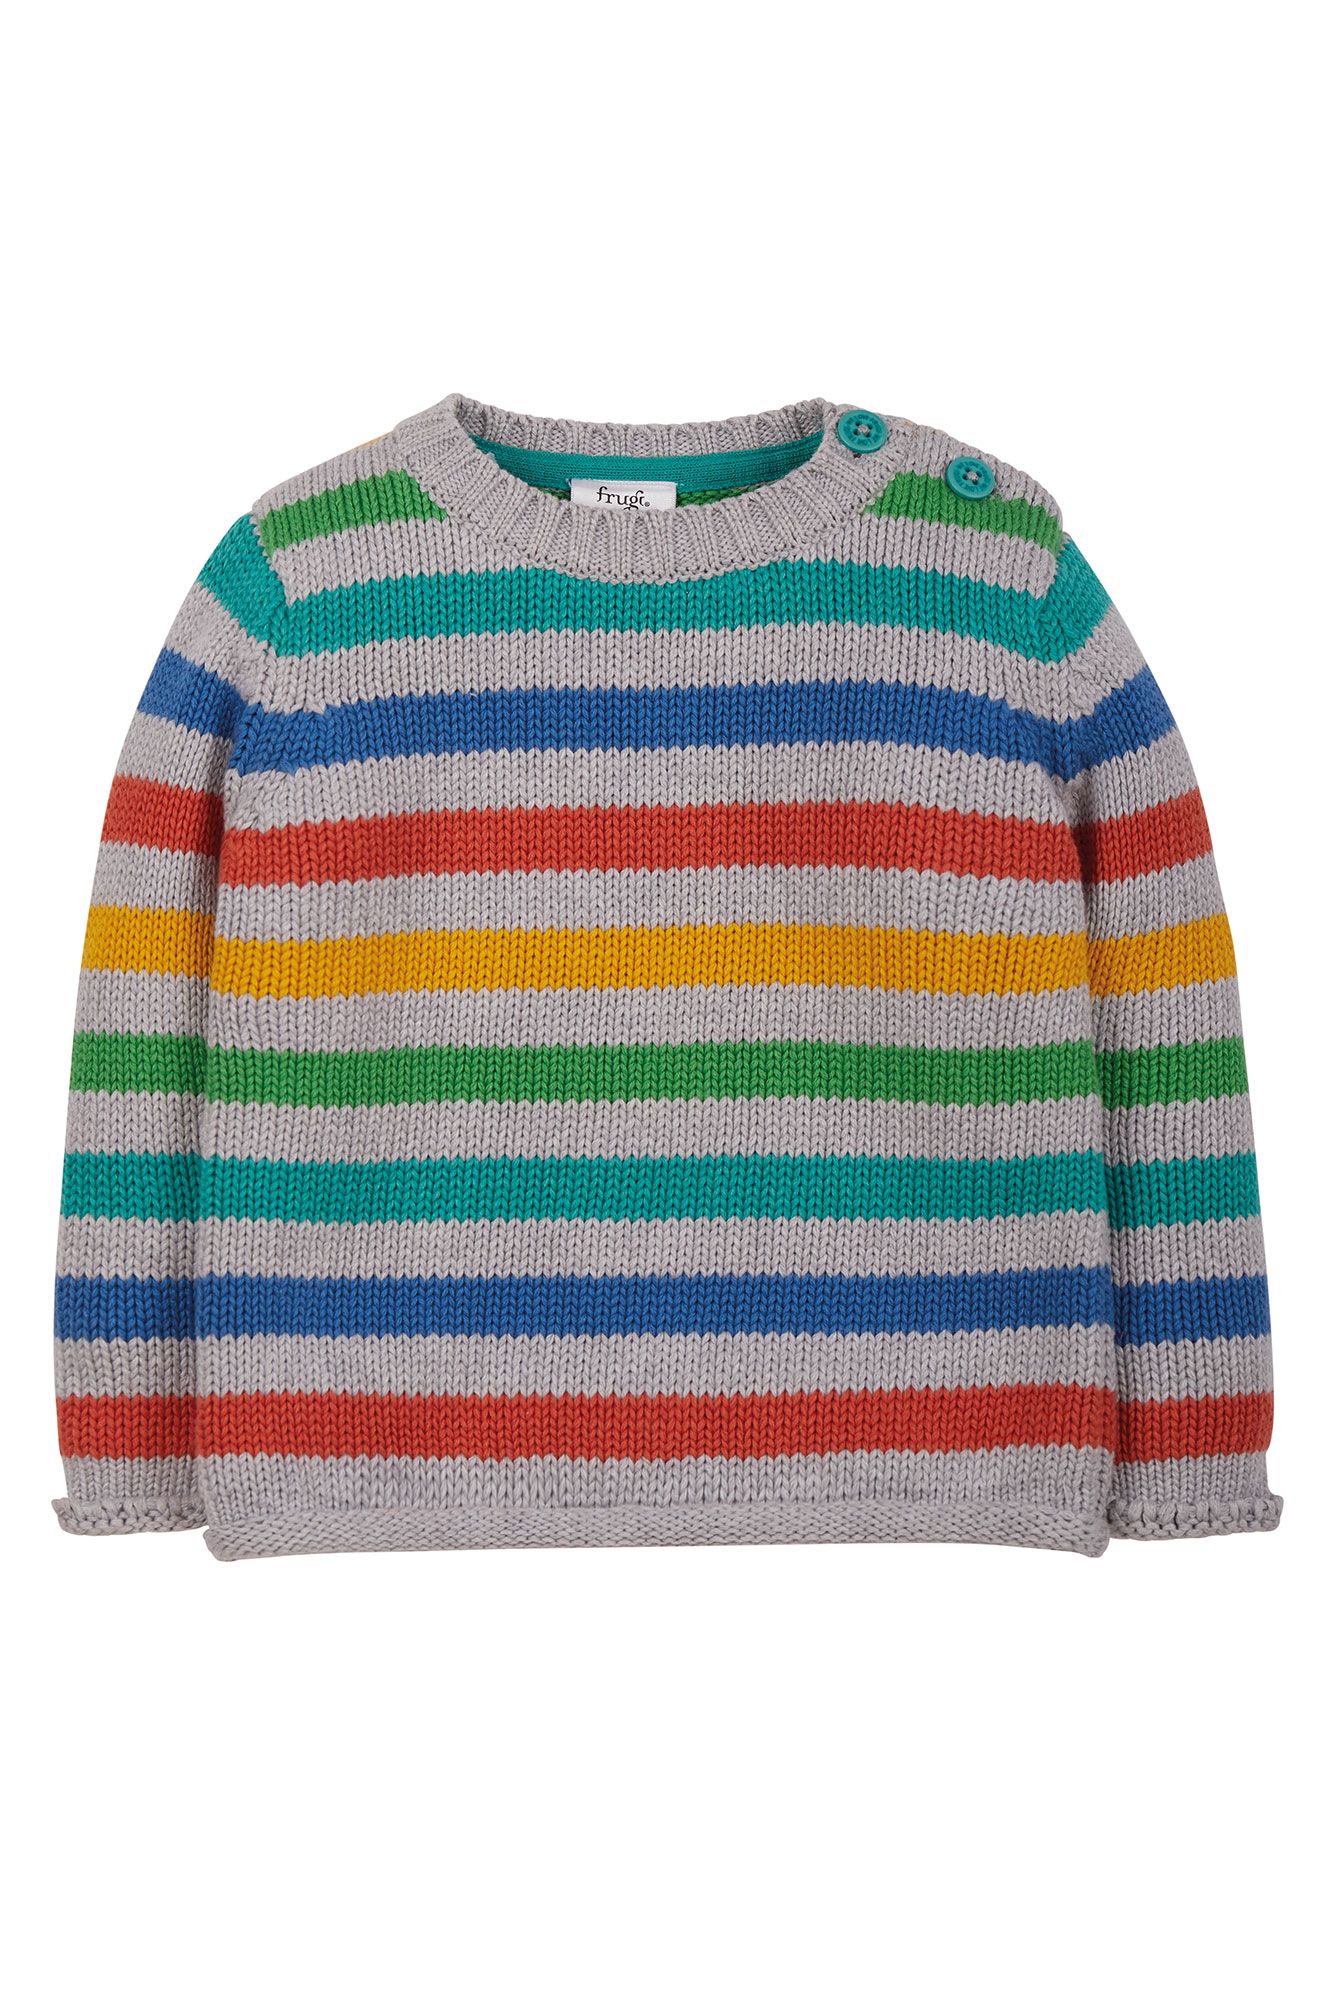 Apex Knitted Jumper